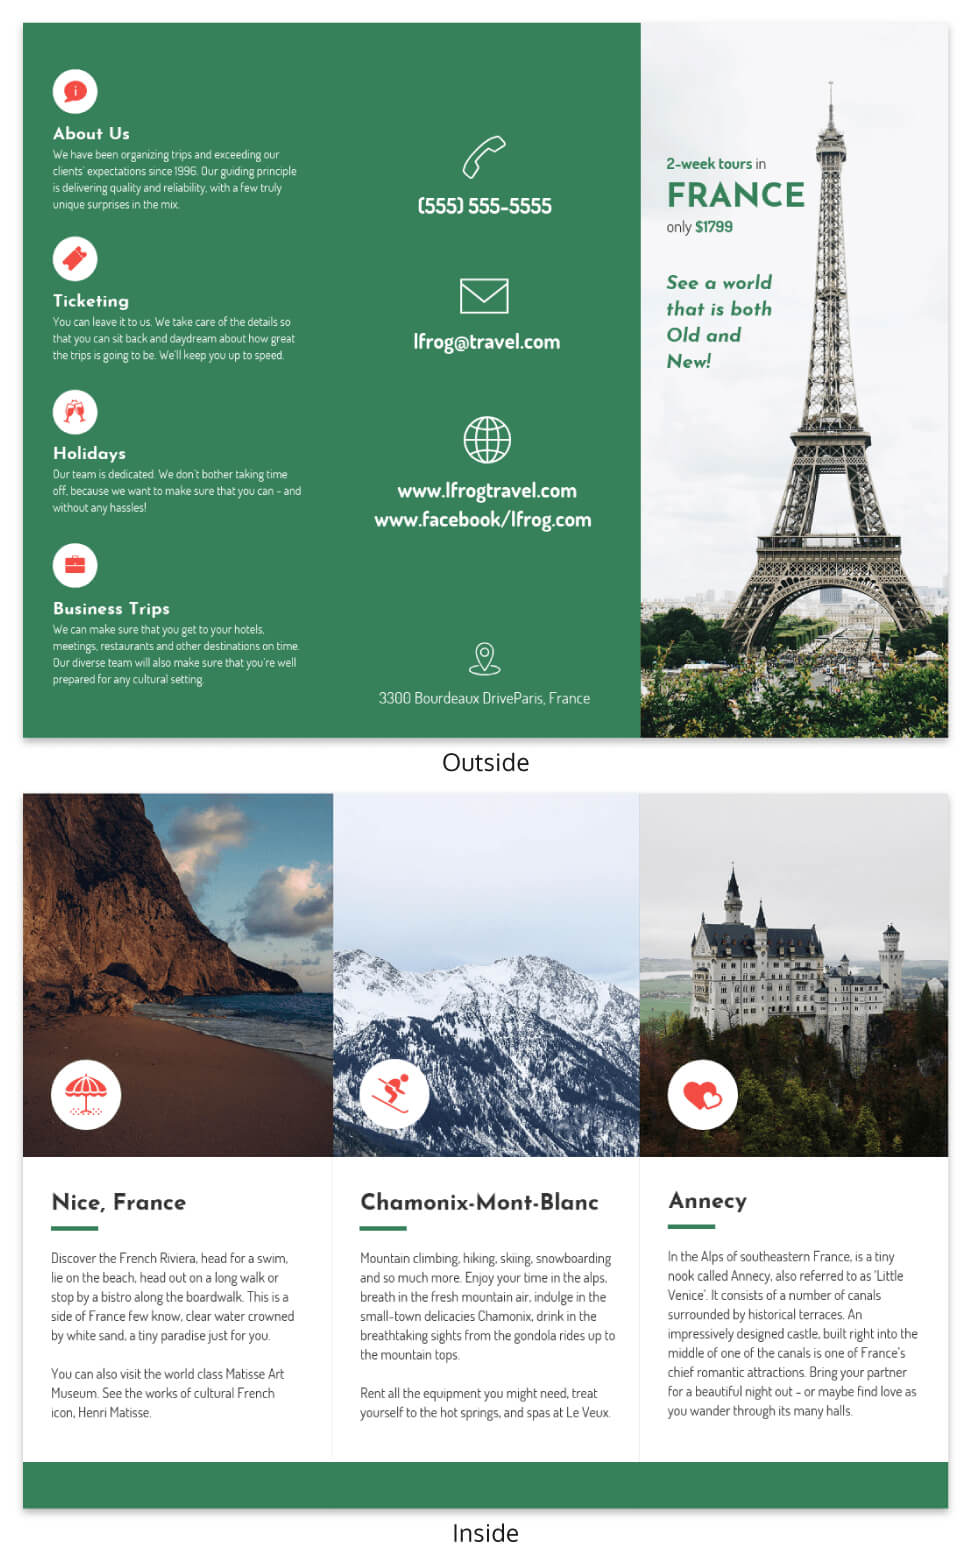 france-tri-fold-travel-brochure-with-regard-to-travel-brochure-template-for-students